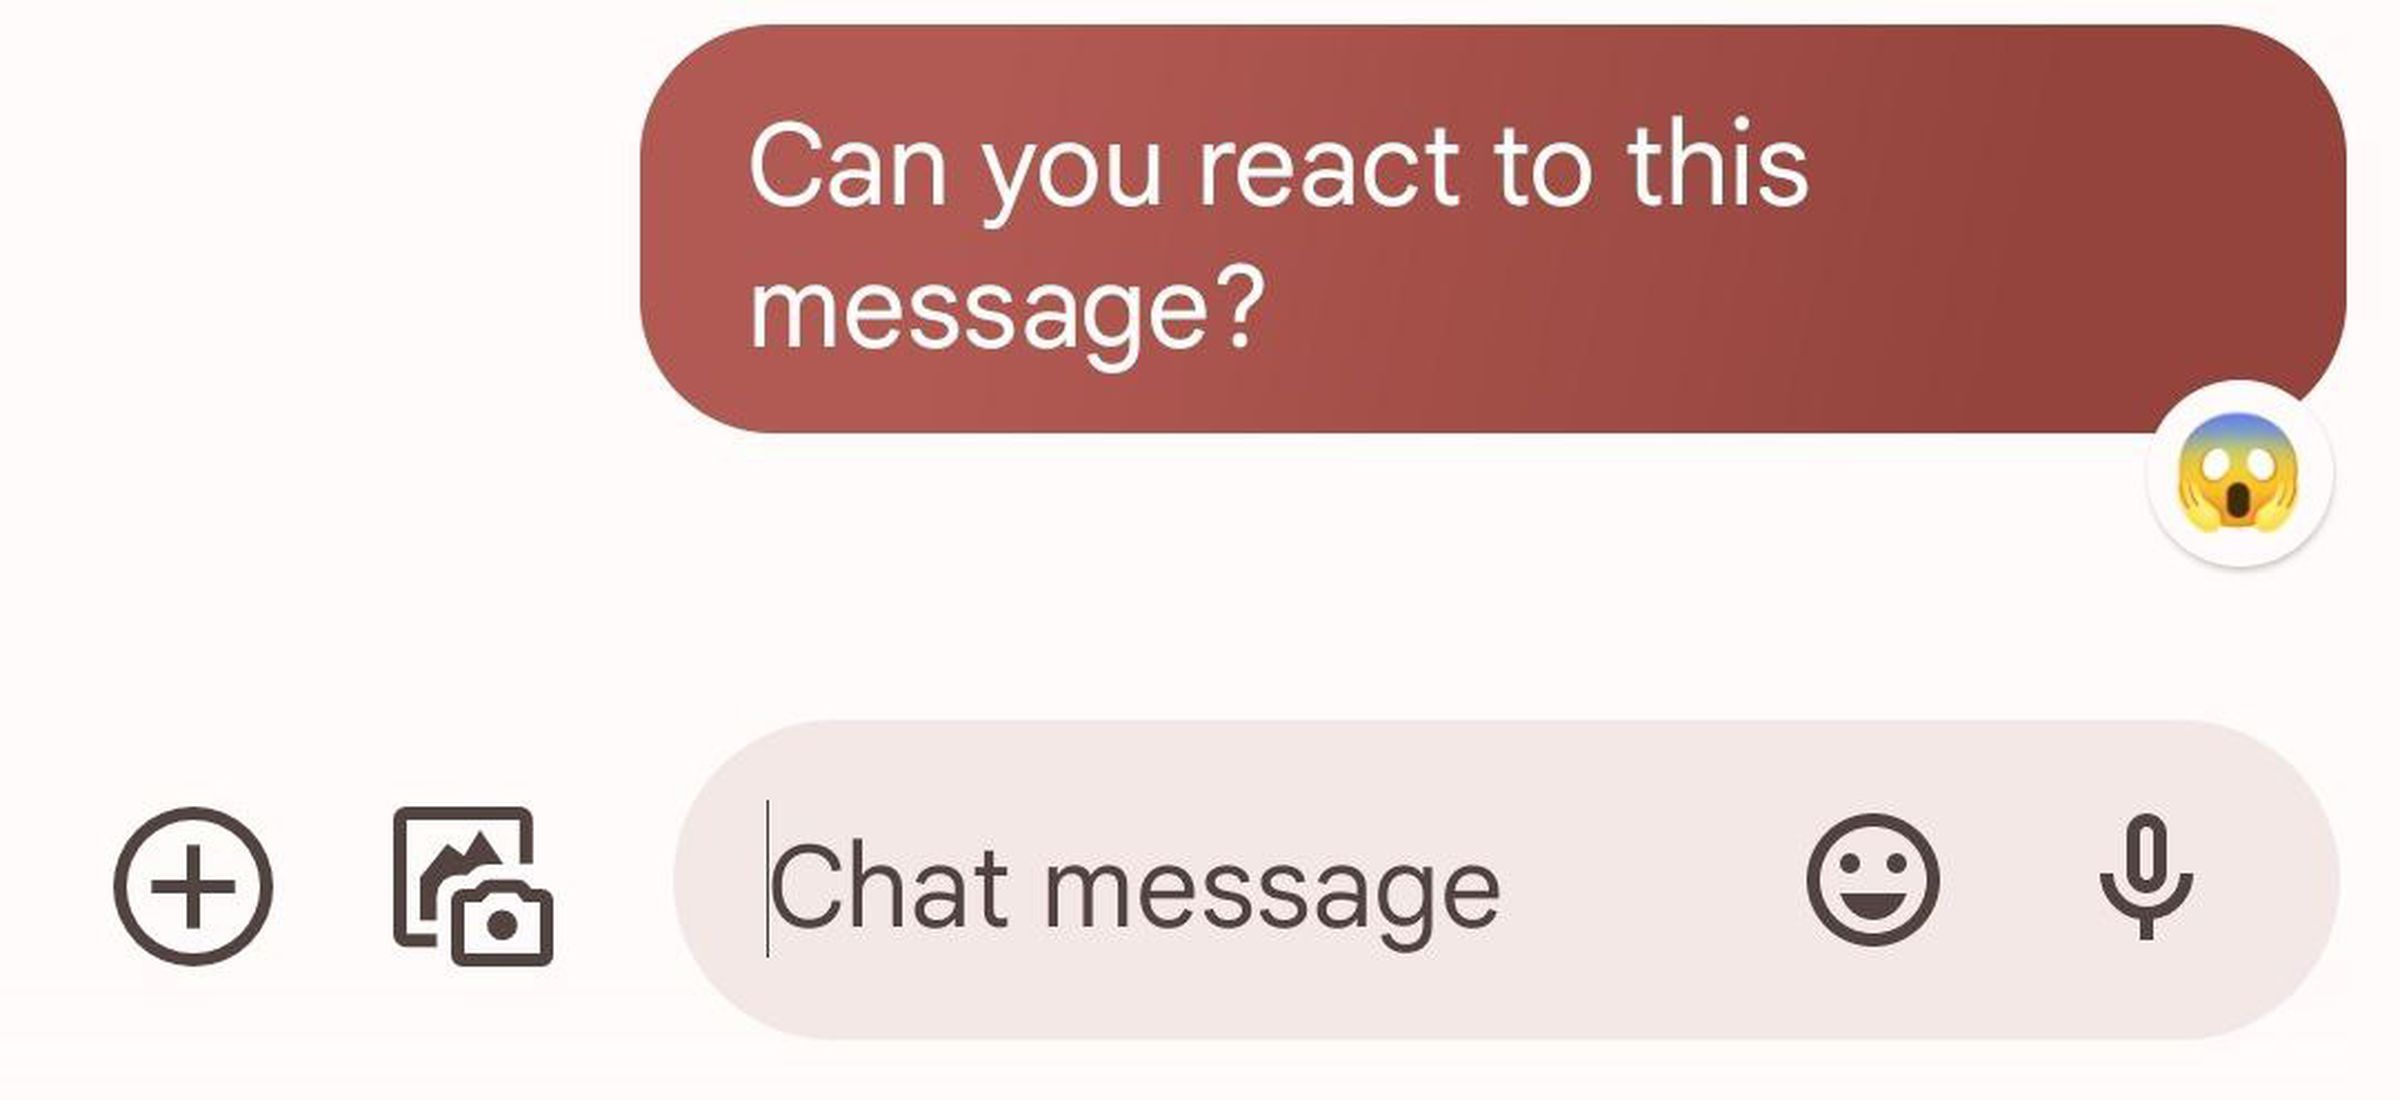 Screenshot of a text saying “Can you react to this message?” A face screaming in fear emoji is added to the message bubble.